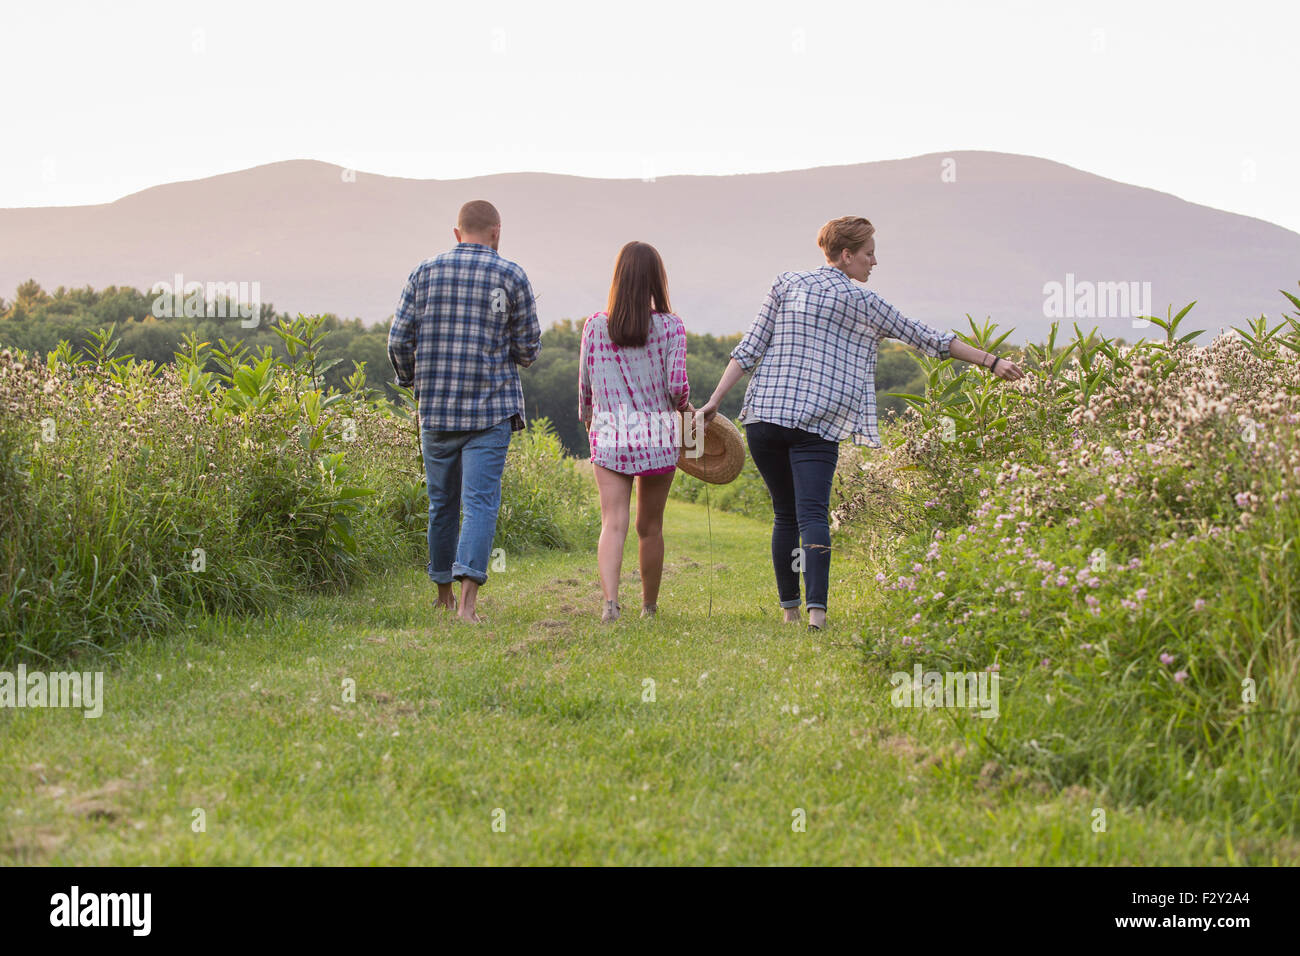 Rear view of two women and a man walking along a mown path in a meadow of wild flowers and grass. Stock Photo